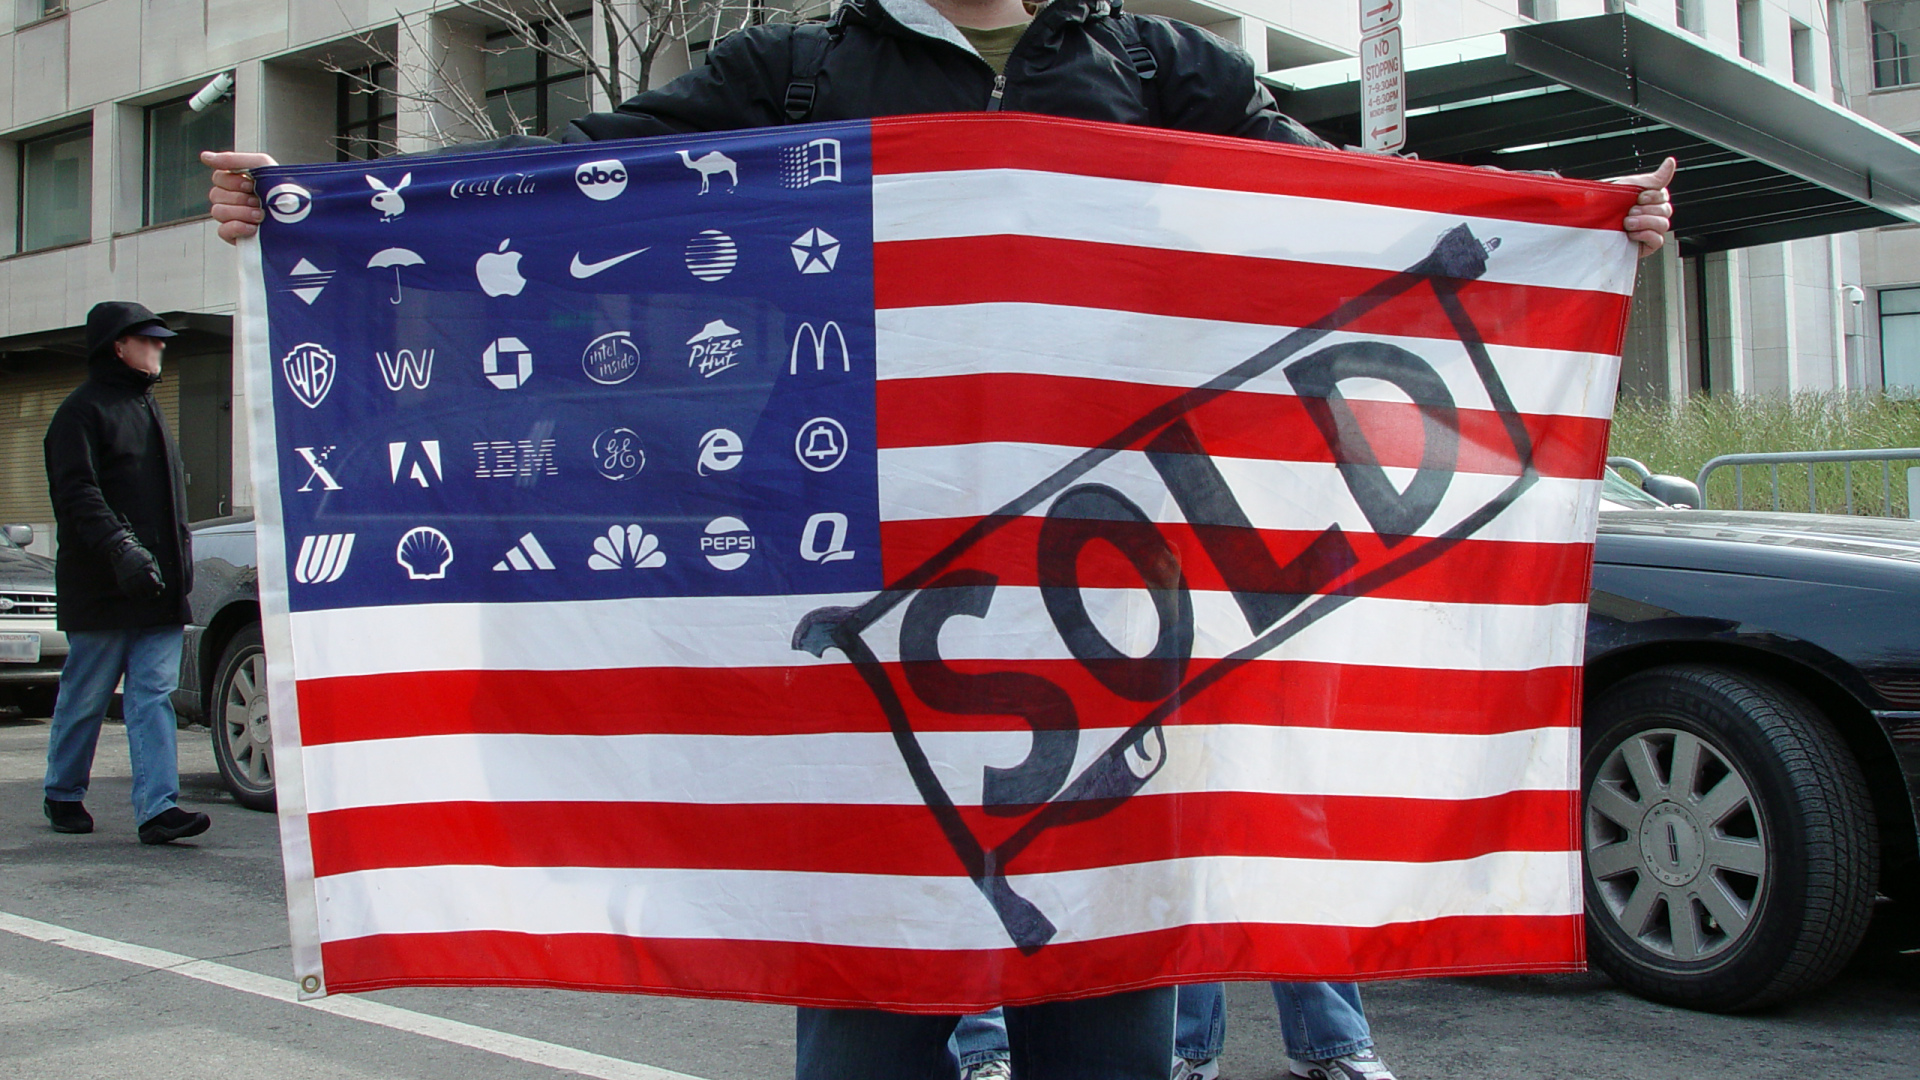 Image: The 10 Most Evil Corporations You’re Buying From (Video)